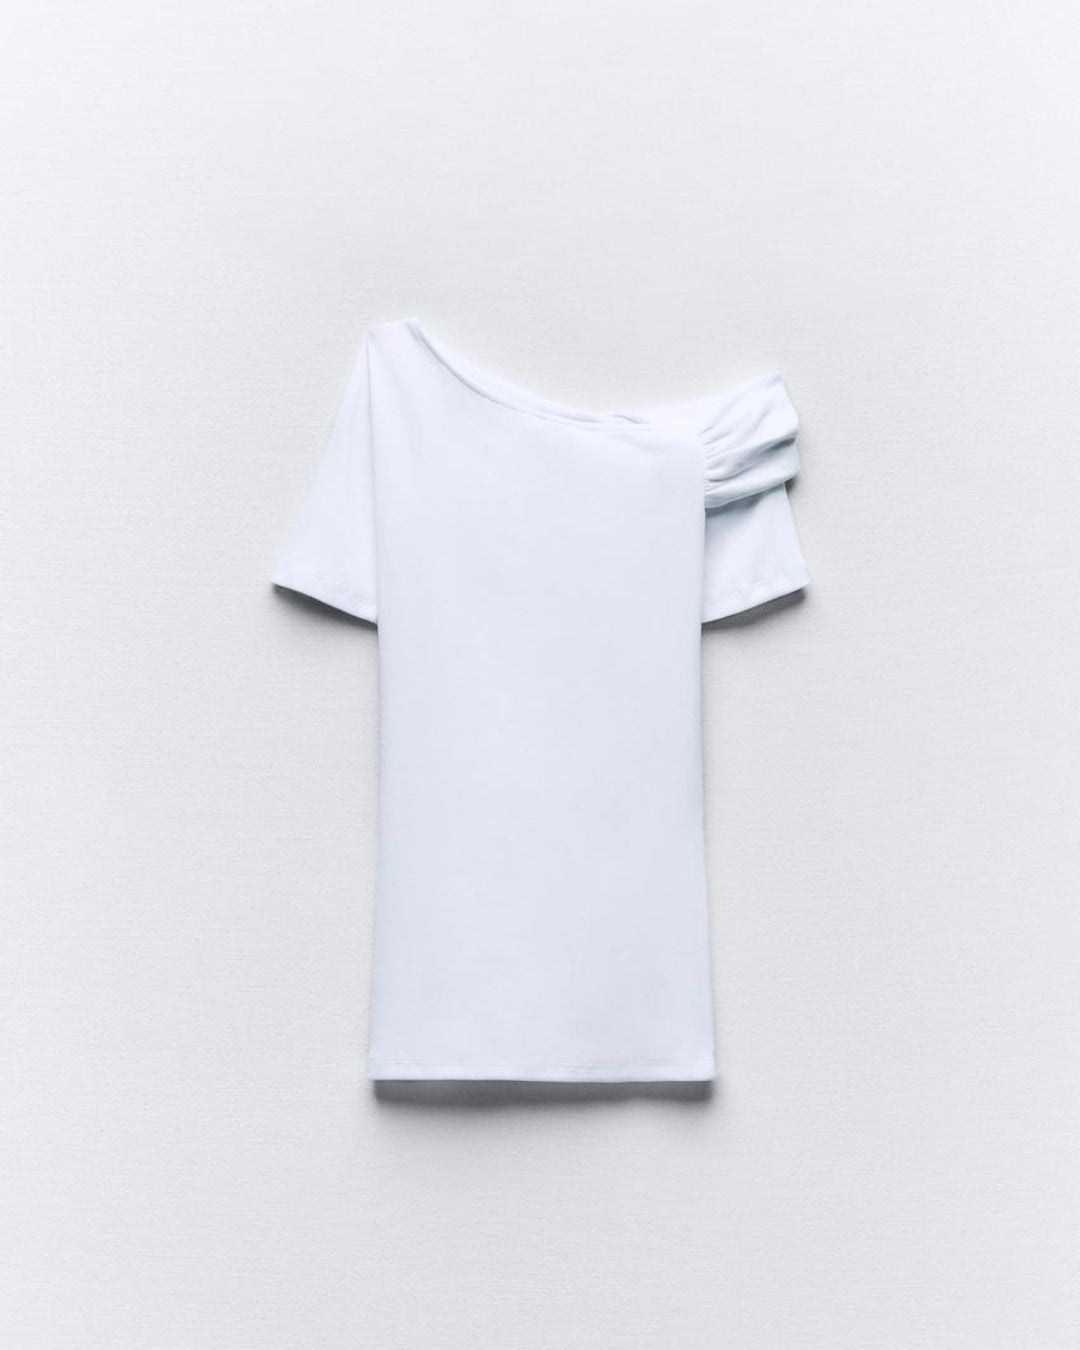 RUCHED ASYMMETRICAL TOP,bodycon, casual, cotton, knitted, one shoulder, regular, short sleeves, skinny fit, solid, spandex, stretchable, summer, tops, topwear, twisted, twisted neck, white,ruched-asymmetrical-top-white,Color- White
Fabric- 96% Cotton 5% Spandex 
Type- Assymetrical Top
Fit- Skinny Fit
Length- Regular
Neck- Twisted Neck
Sleeves- Short Sleeves
Details- One Shoulder